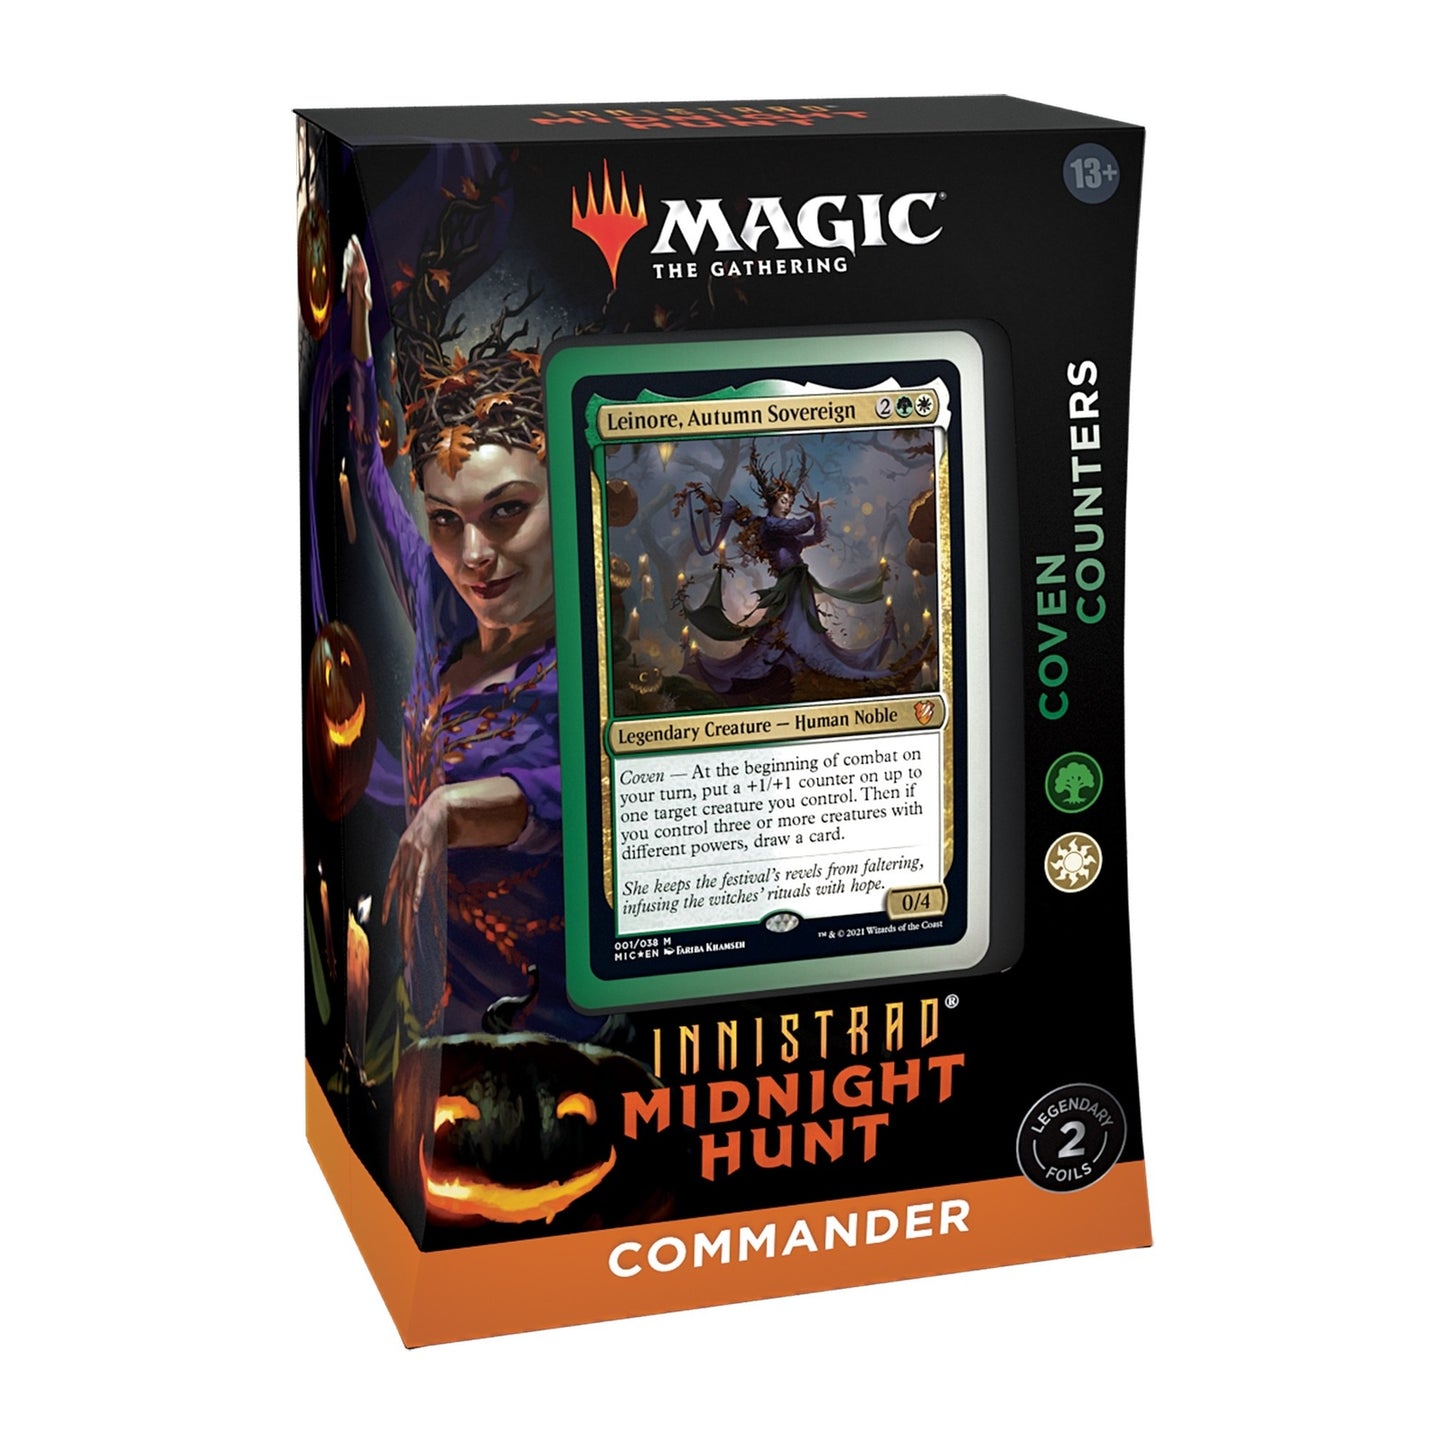 MAGIC THE GATHERING INNISTRAD MIDNIGHT HUNT COMMANDER DECK- COVEN COUNTERS